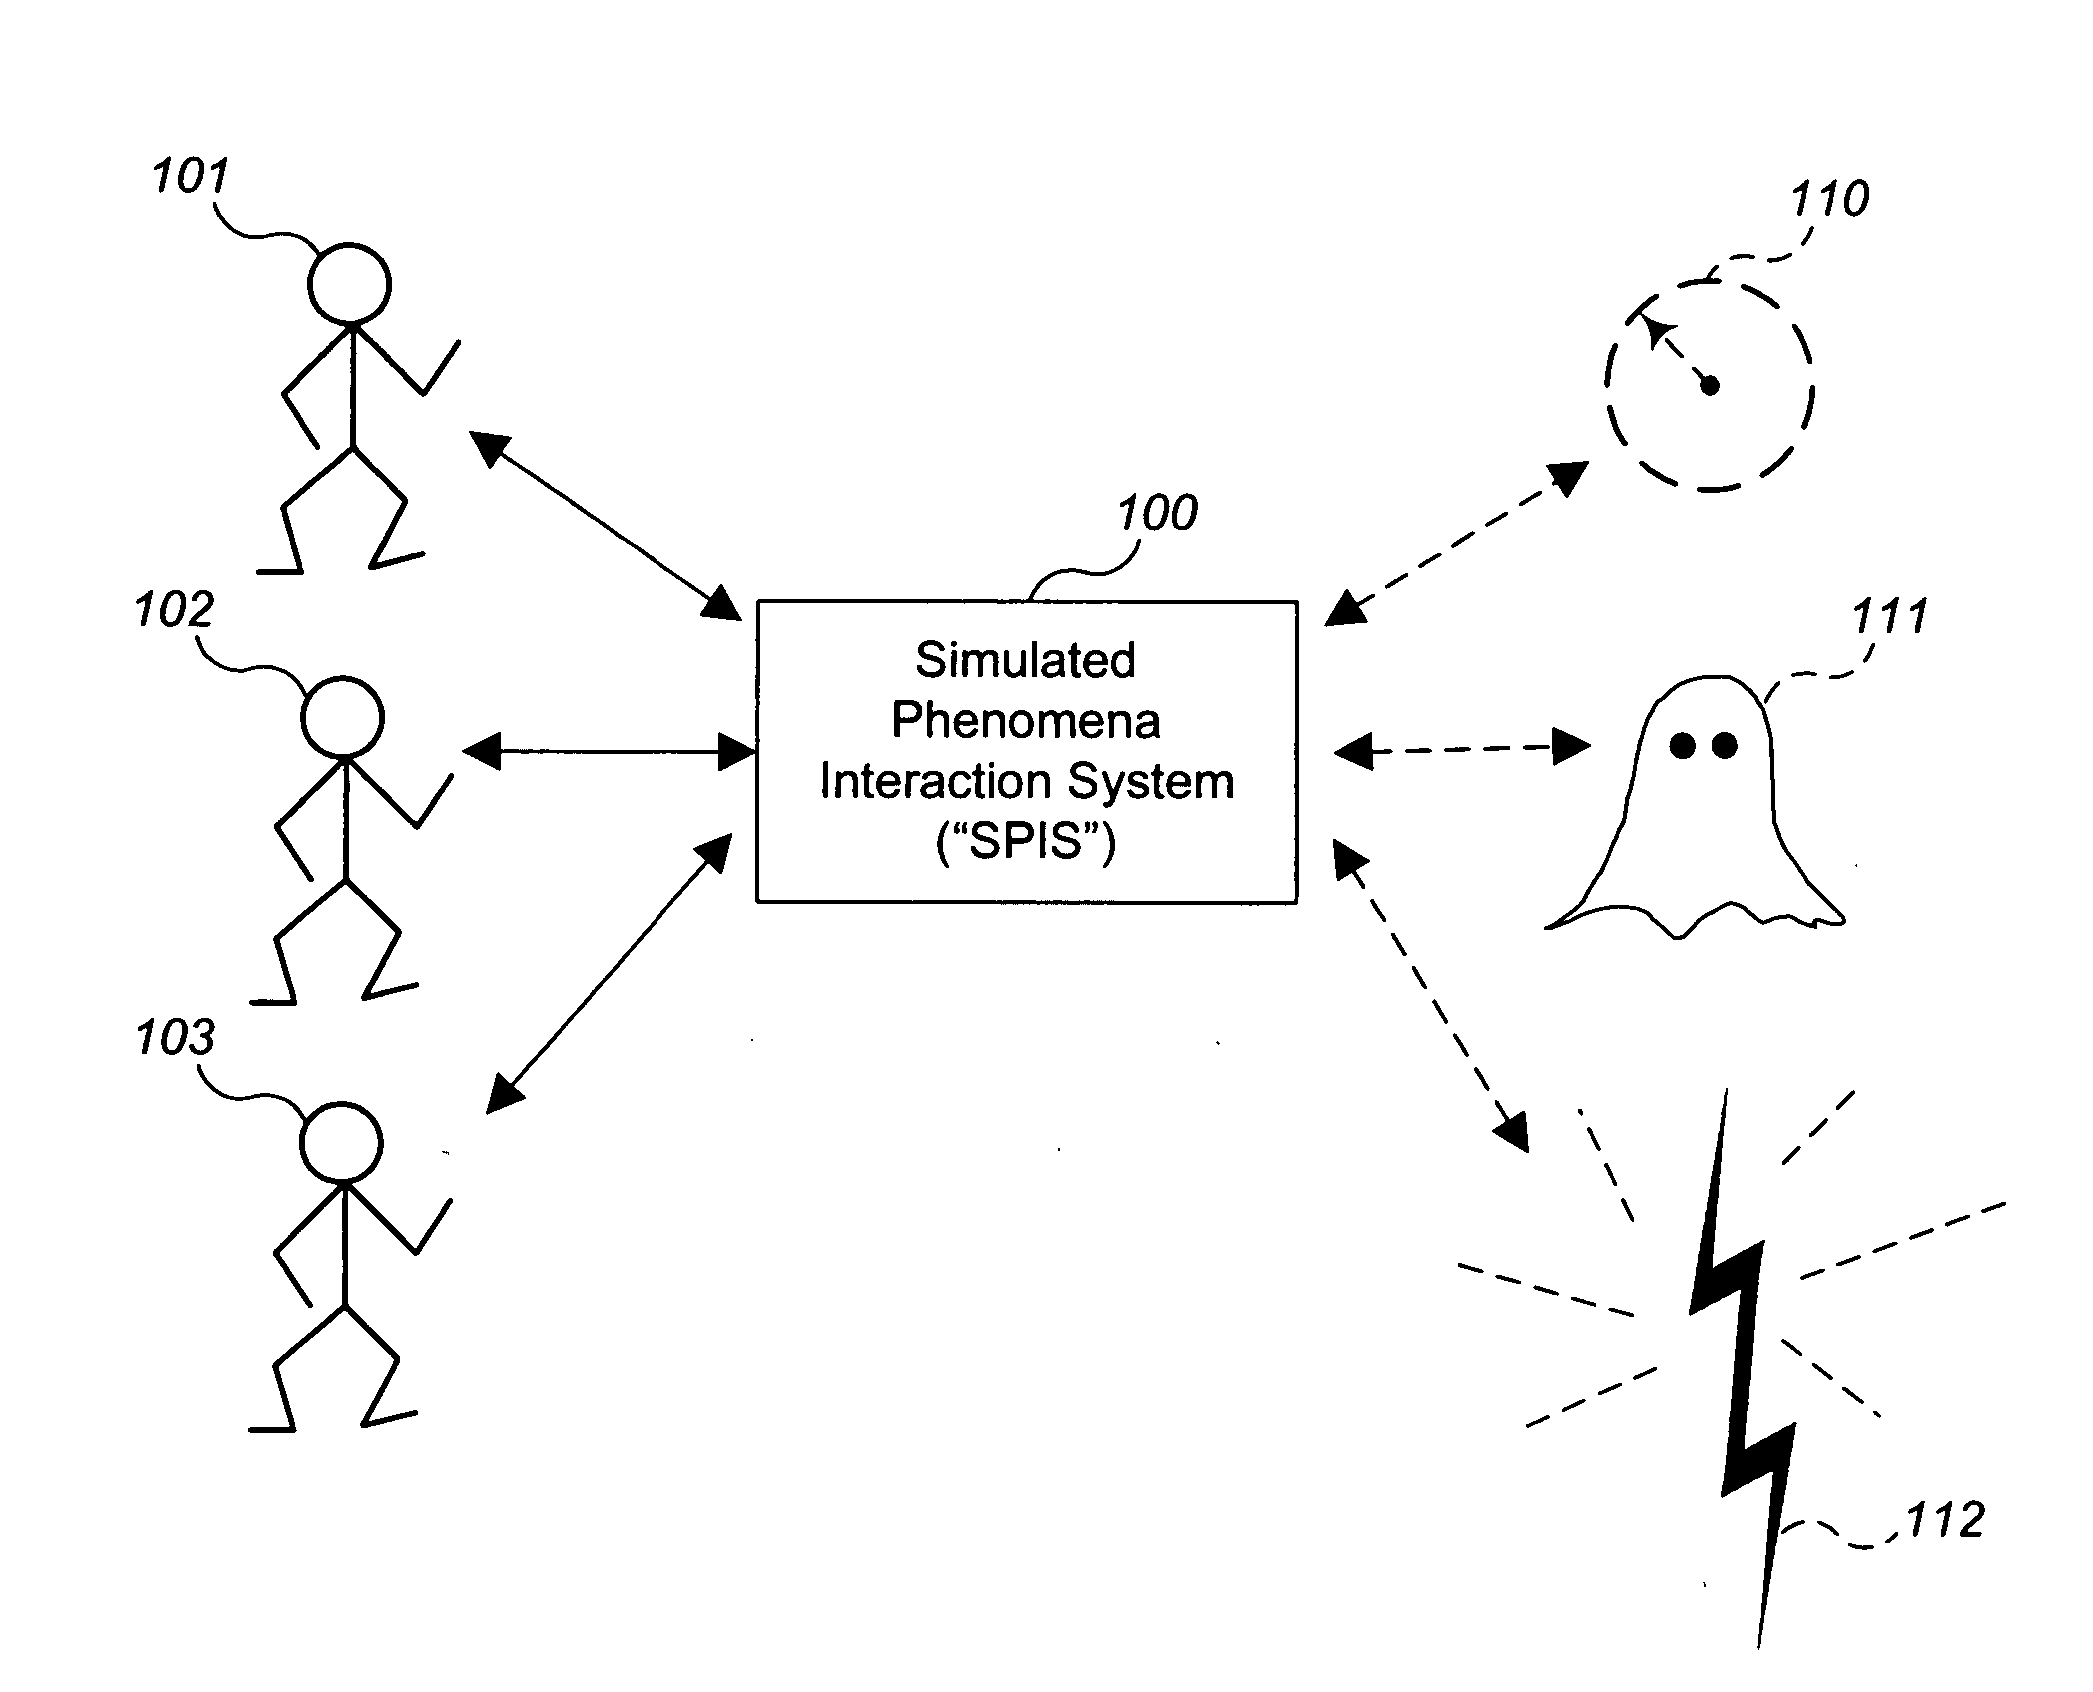 Commerce-enabled environment for interacting with simulated phenomena